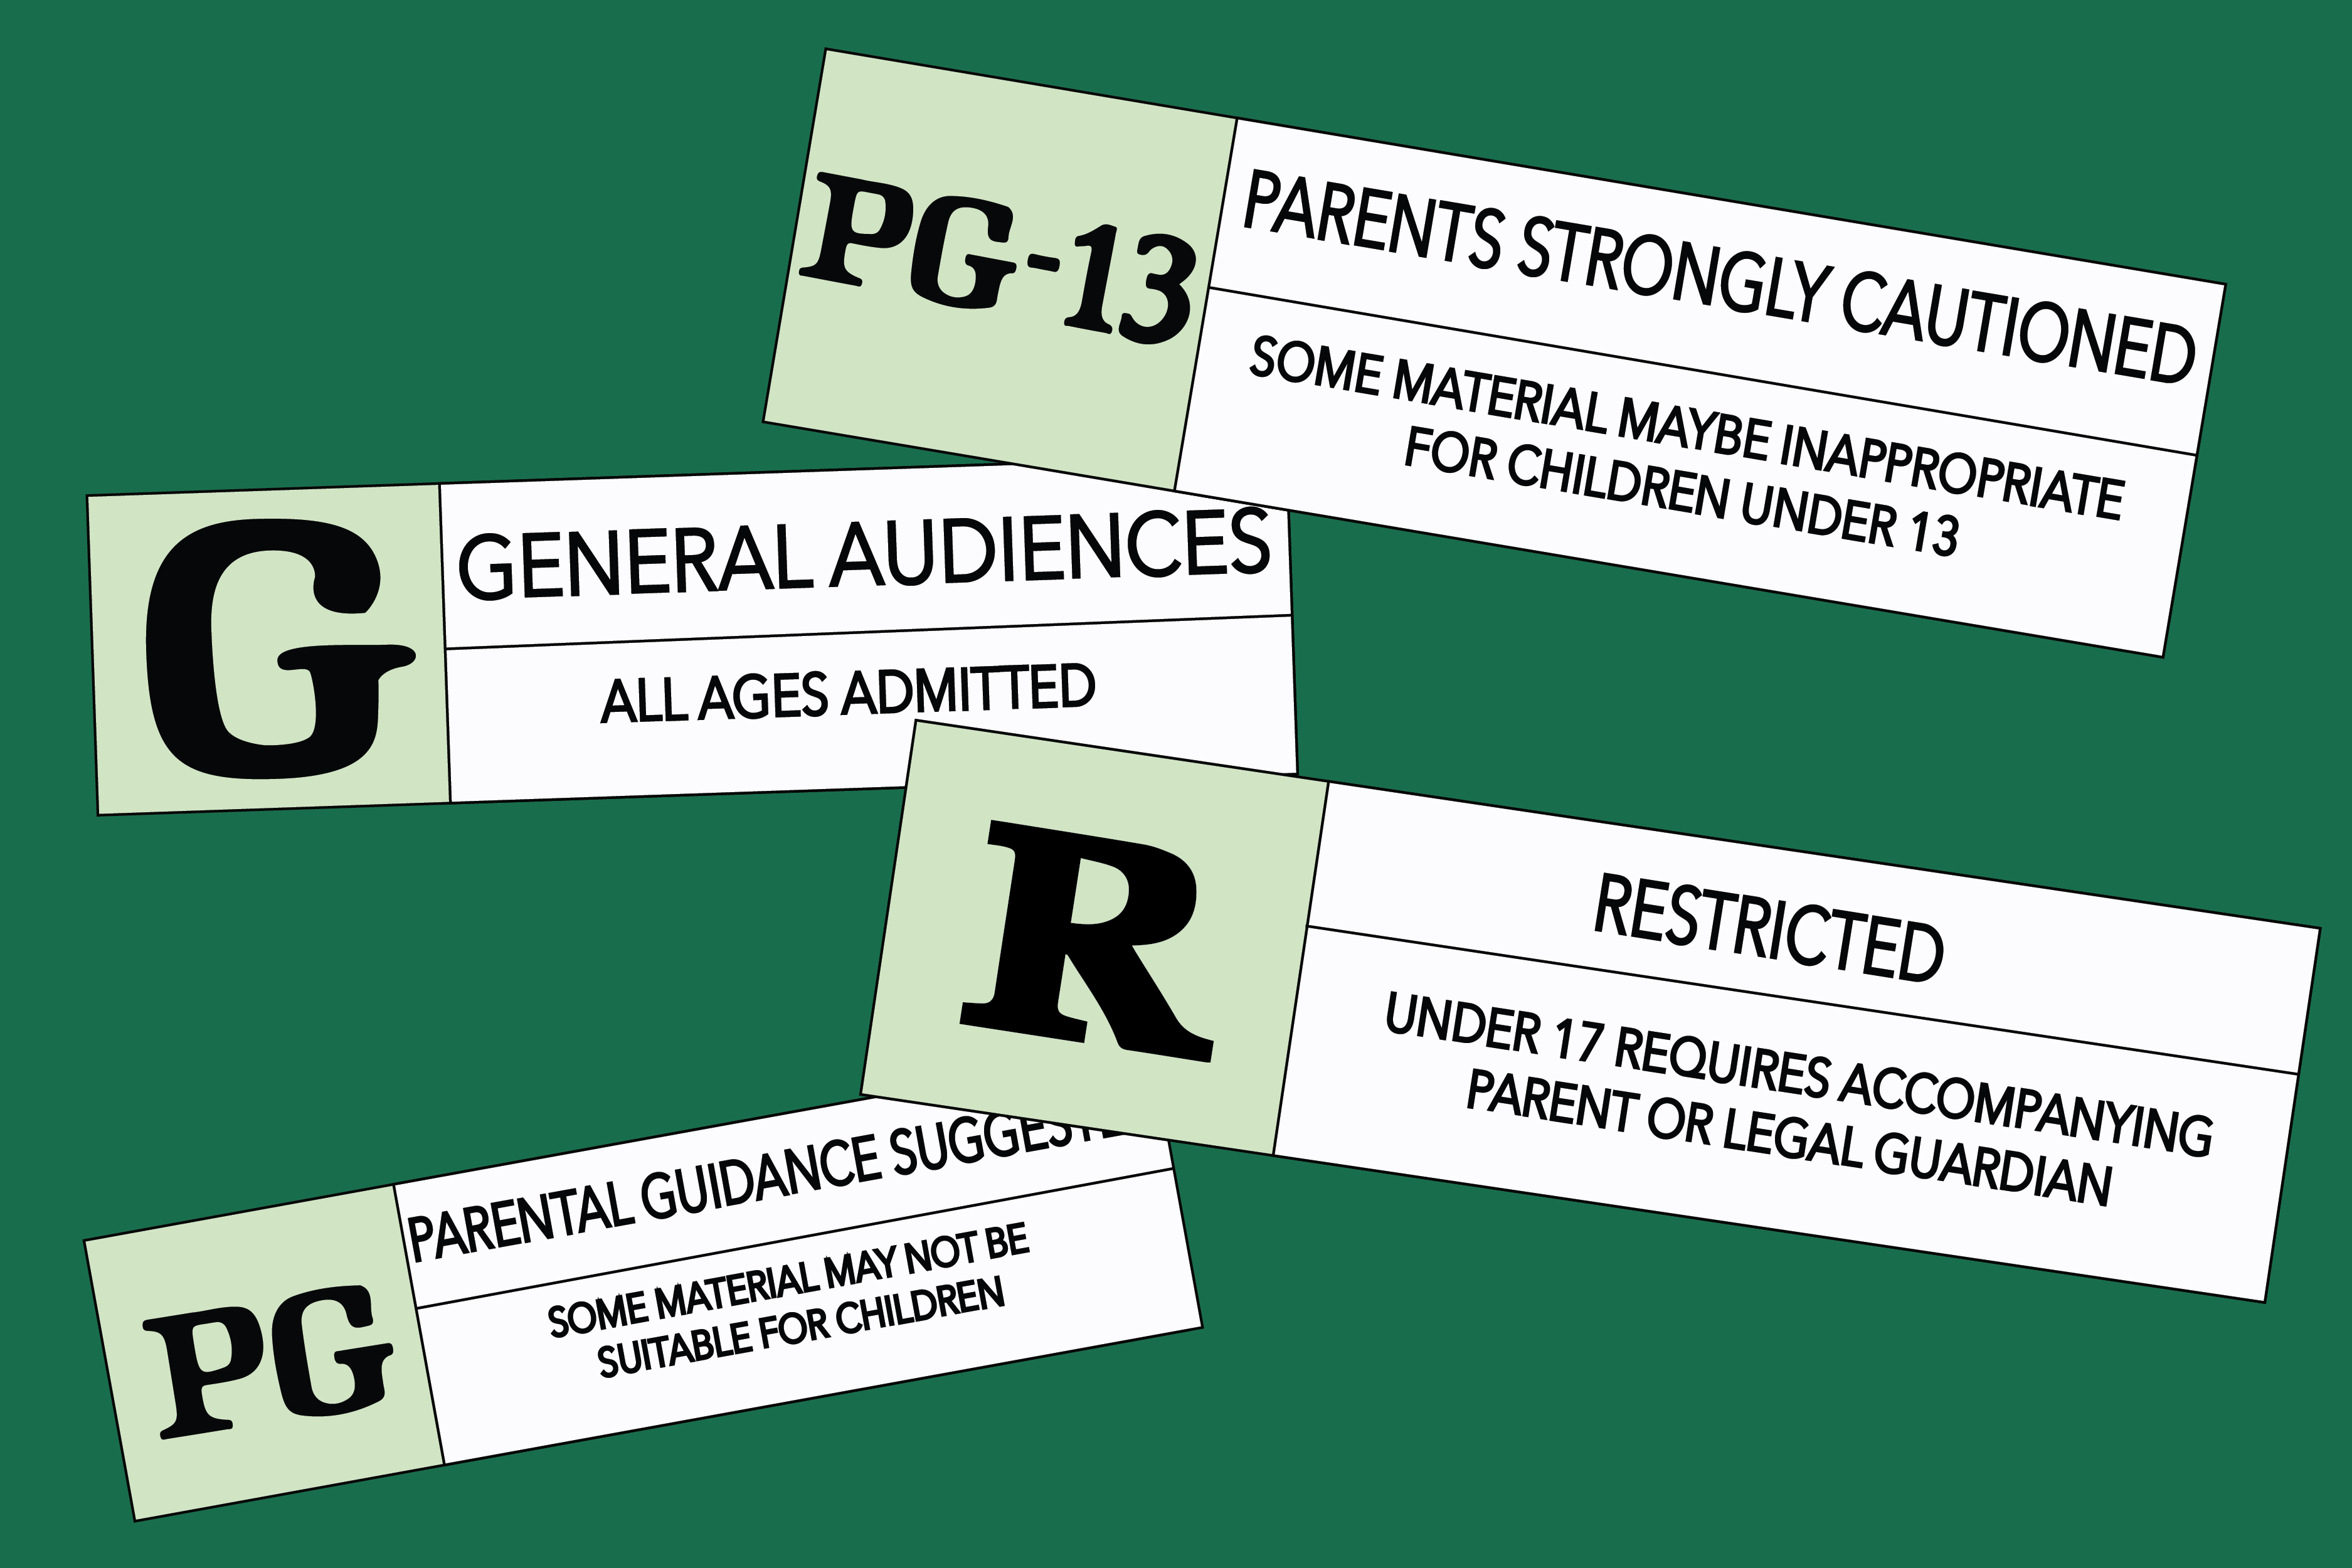 Why the MPAA's Rating System Is Almost Pointless